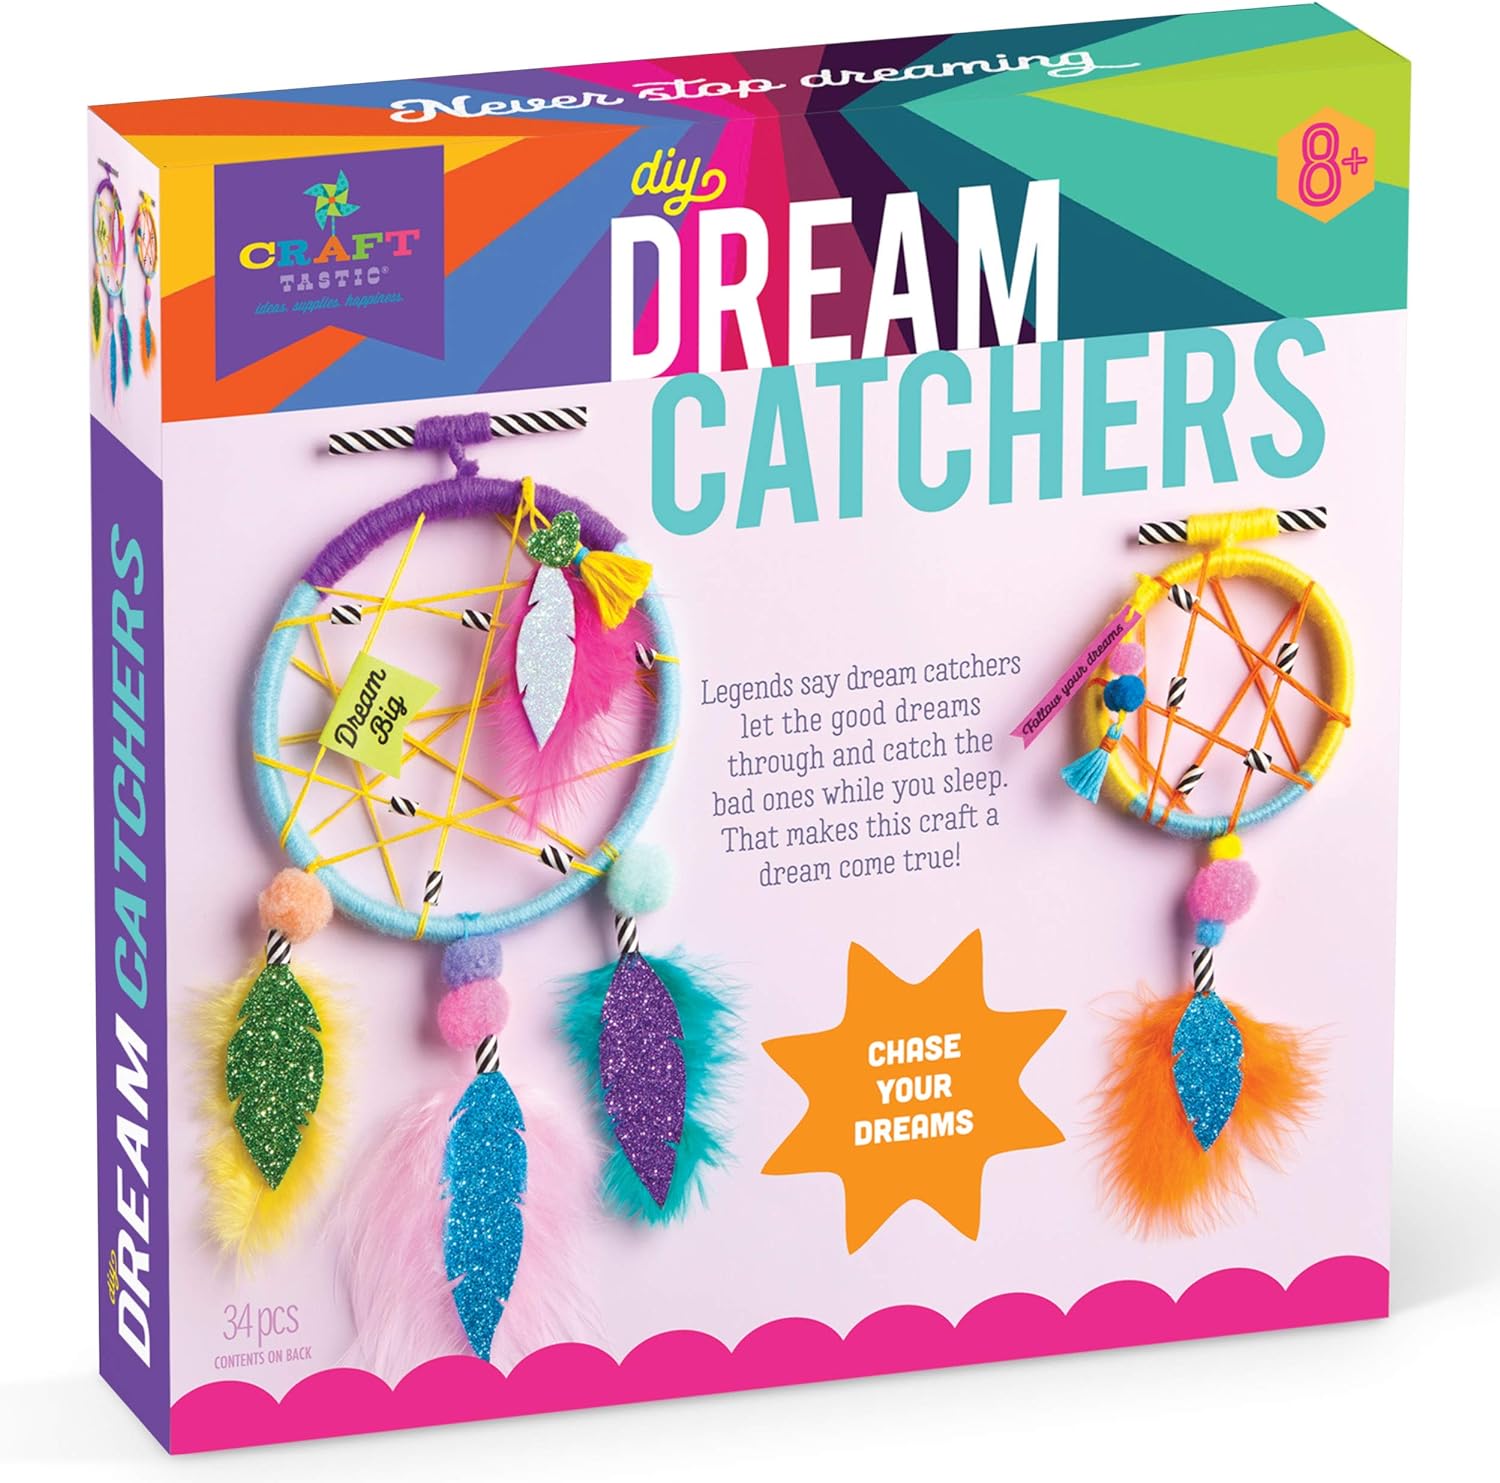 Craft-tastic  Dream Catchers  Arts and Crafts Kit for Kids  Make 2 Colorful Dream Catchers  for Ages 8+, Brown